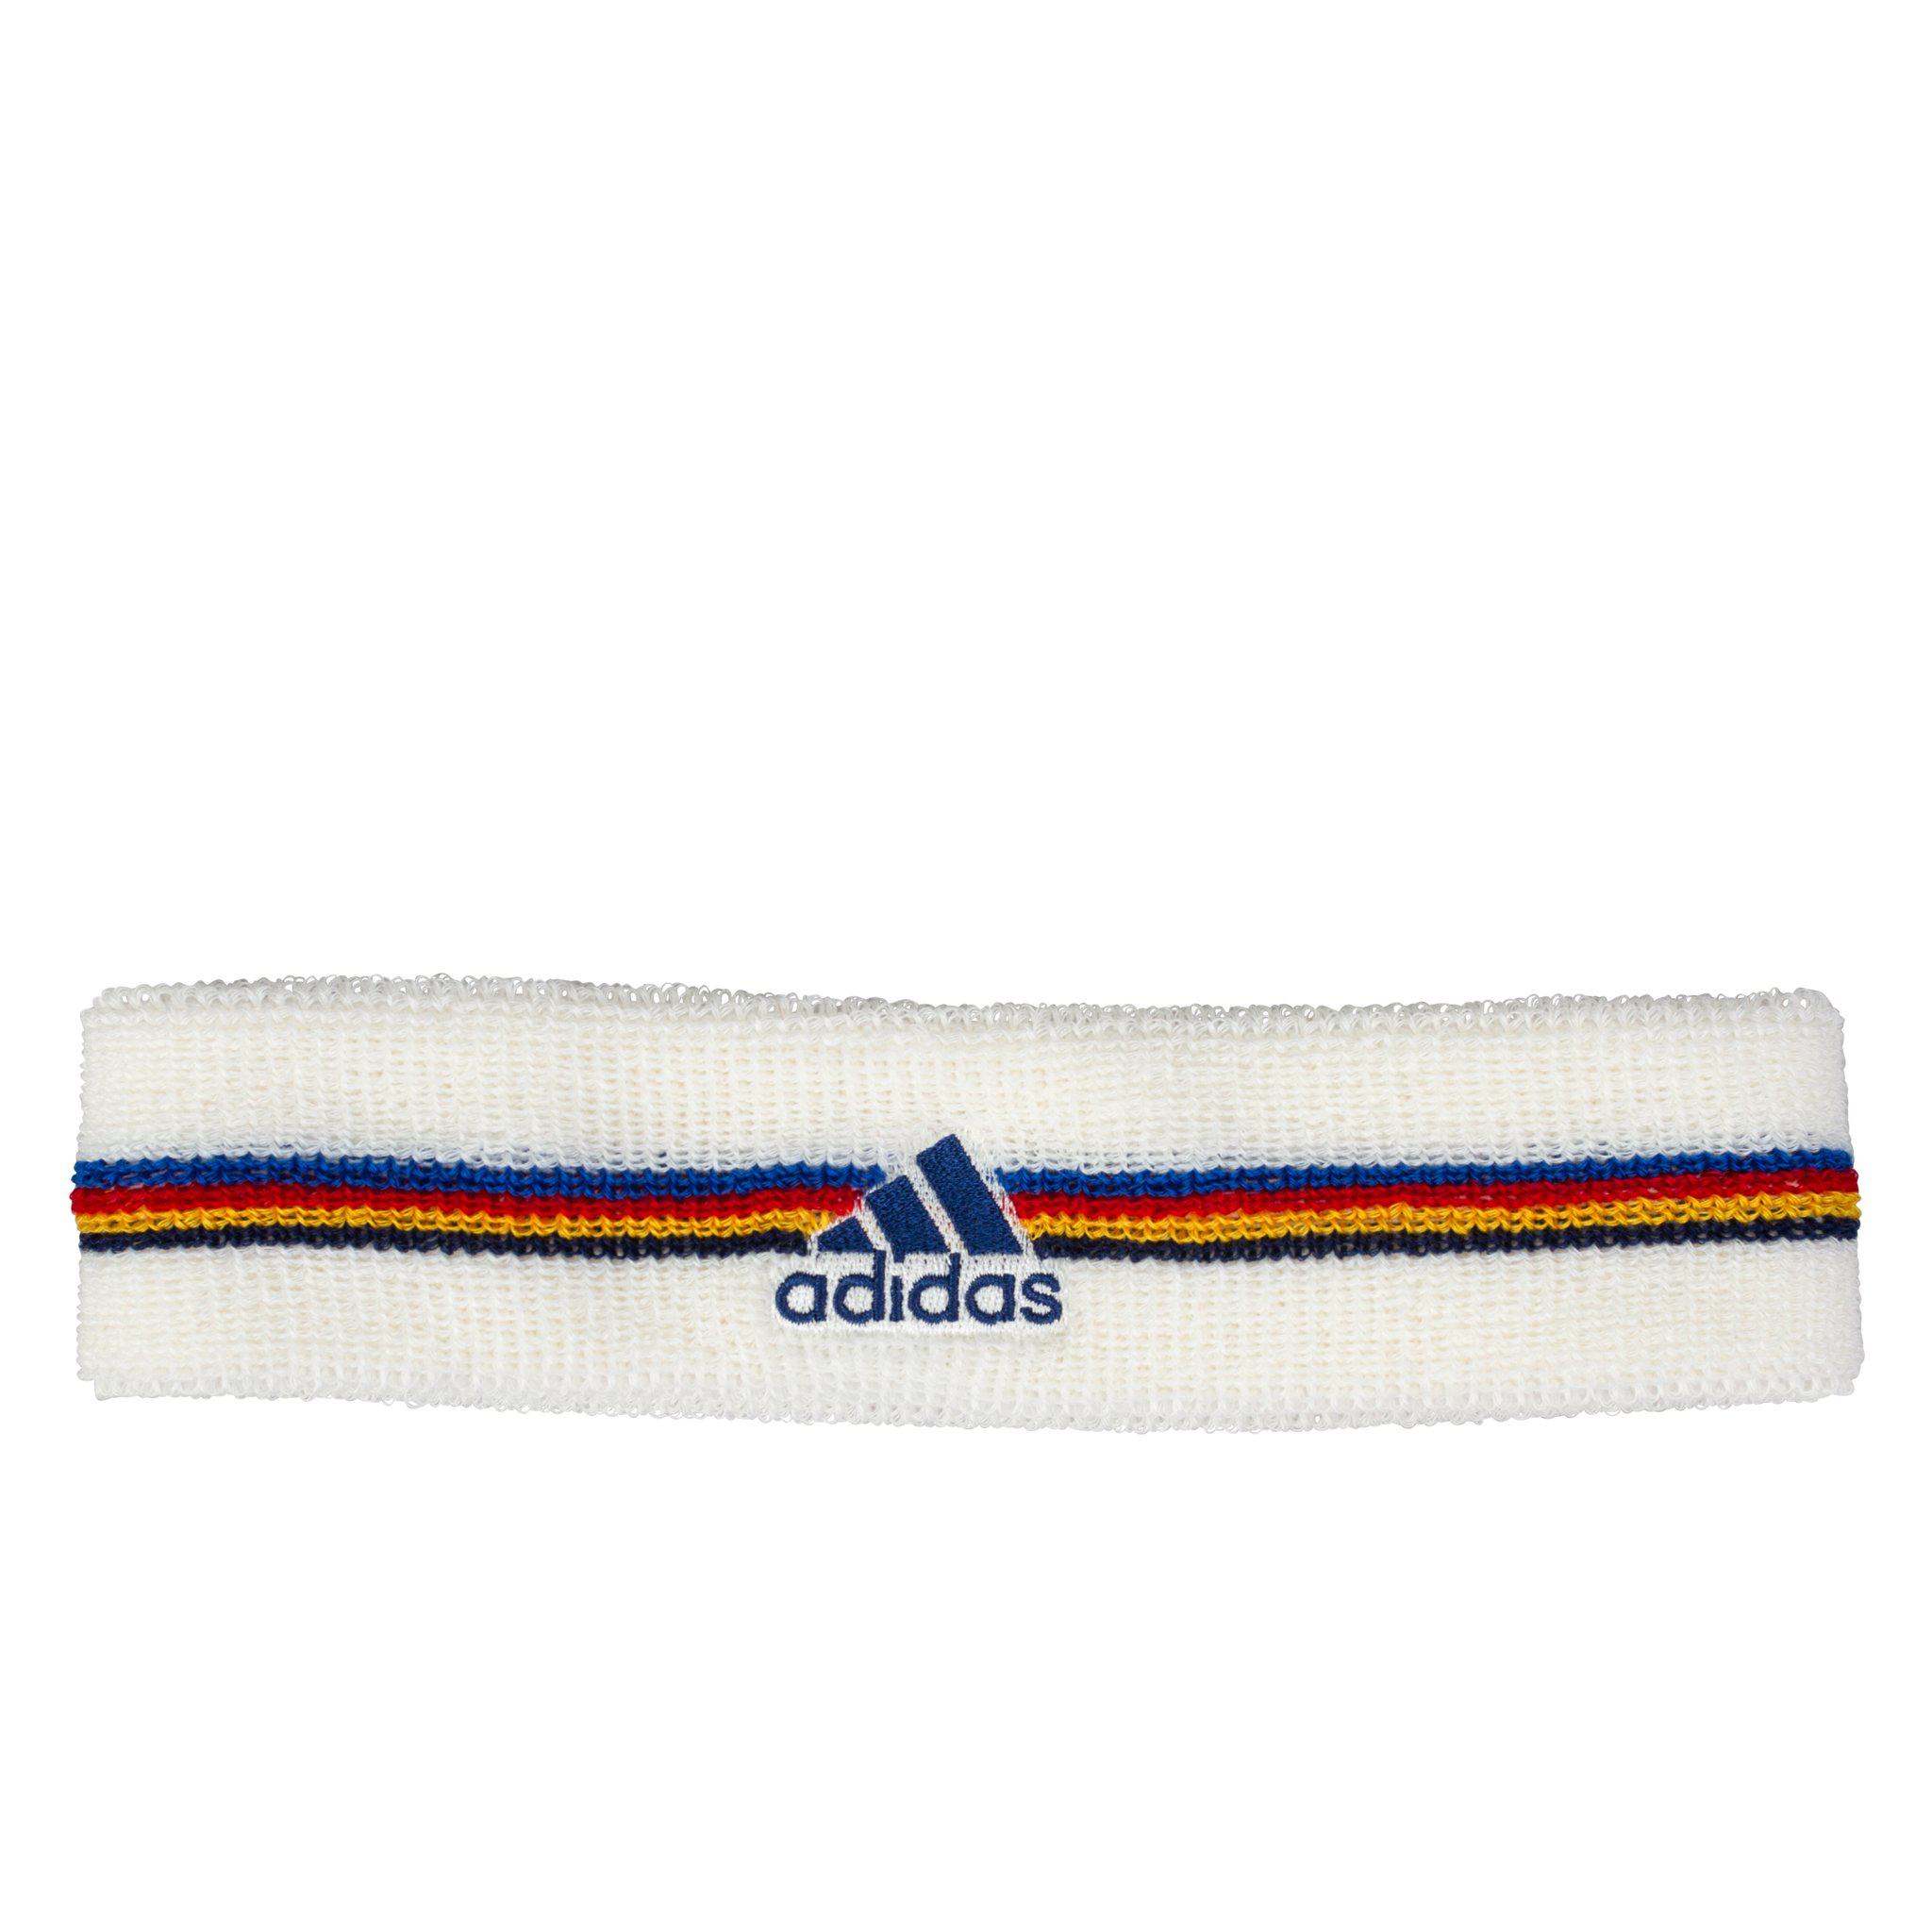 adidas Originals Synthetic Headband in White / Striped (Blue) | Lyst